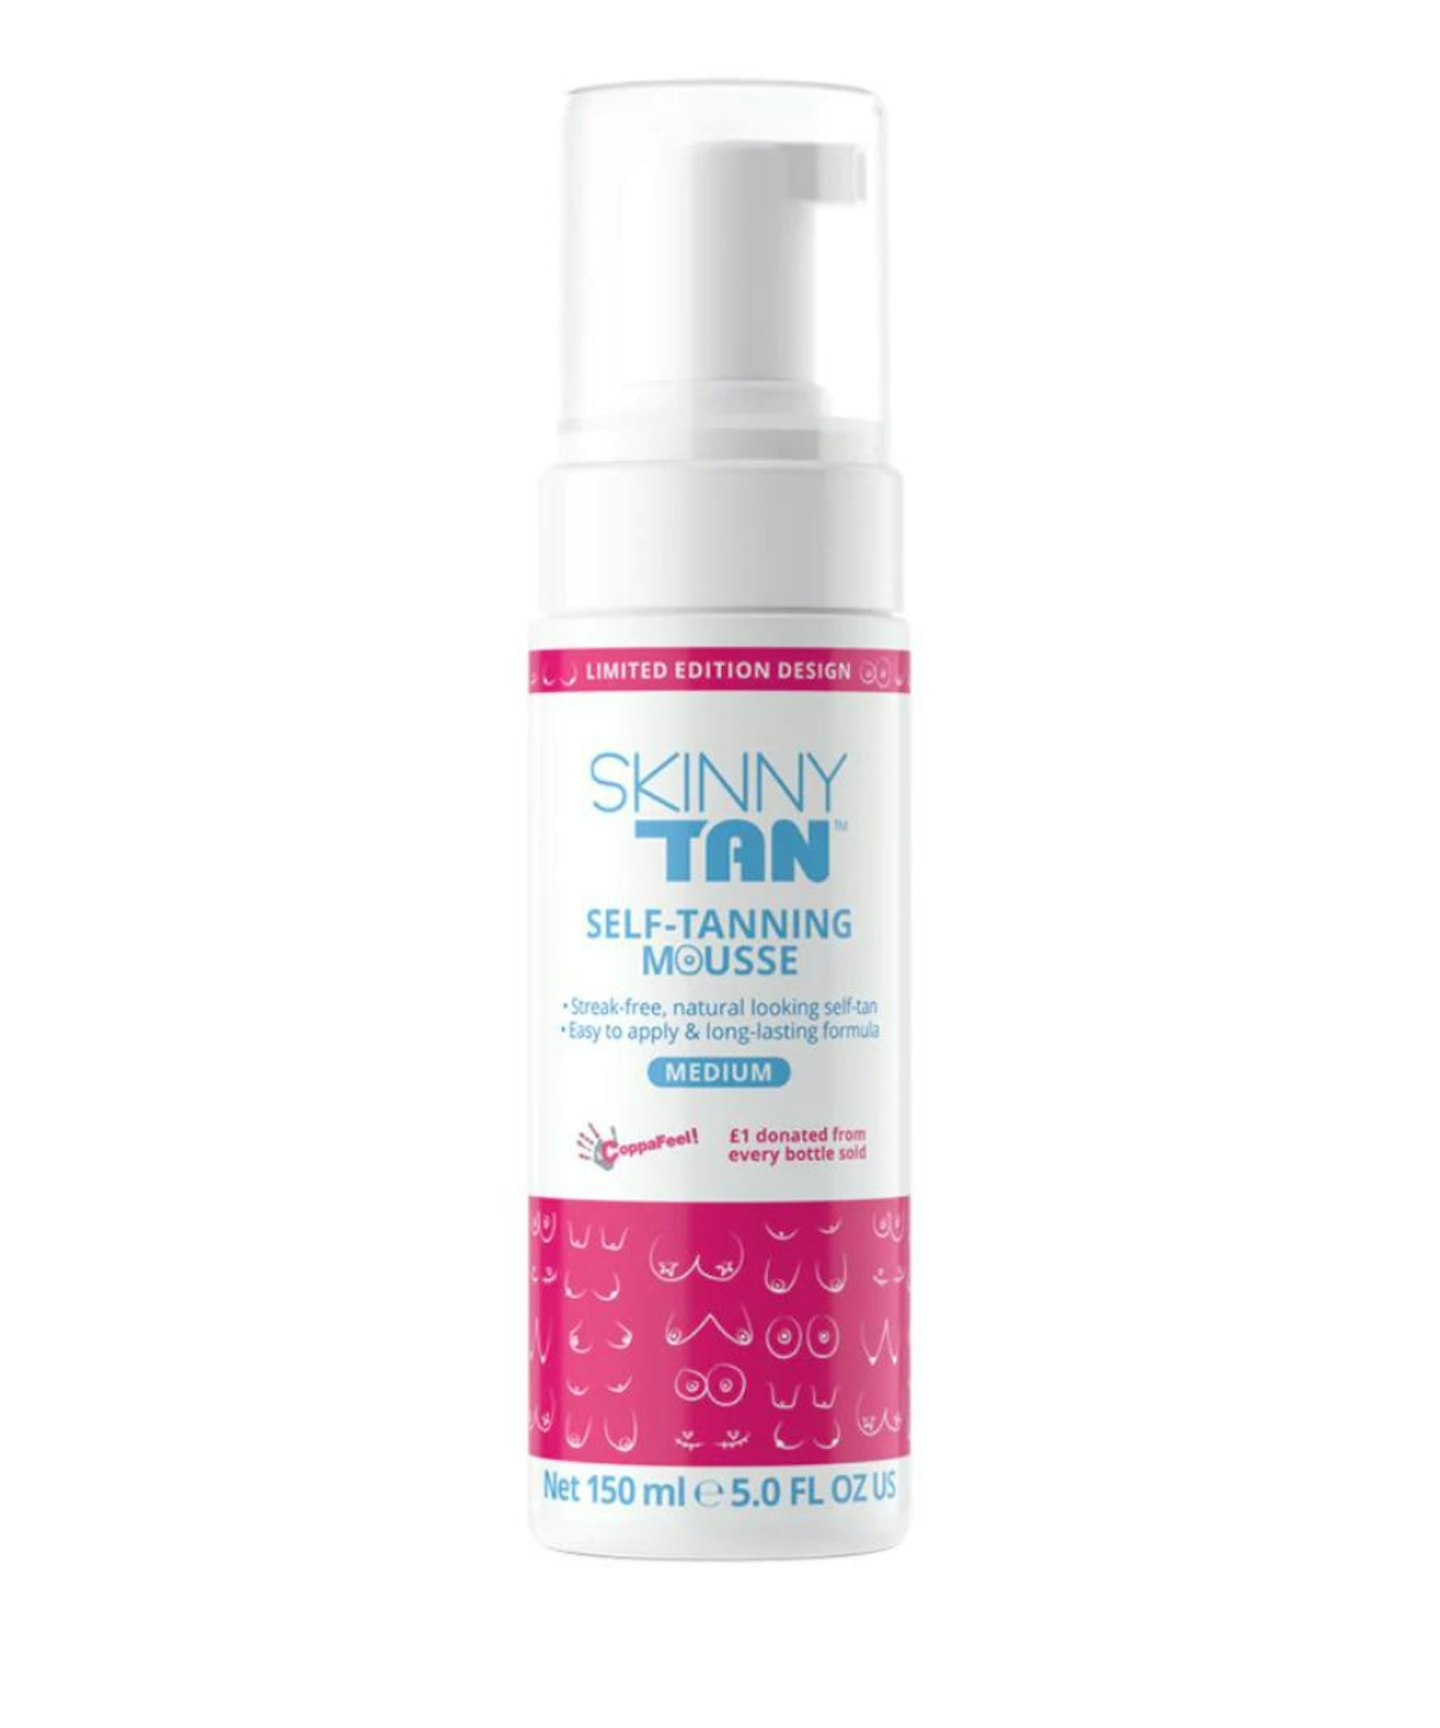 Skinny Tan Limited Edition Coppafeel! Self-Tan Mousse